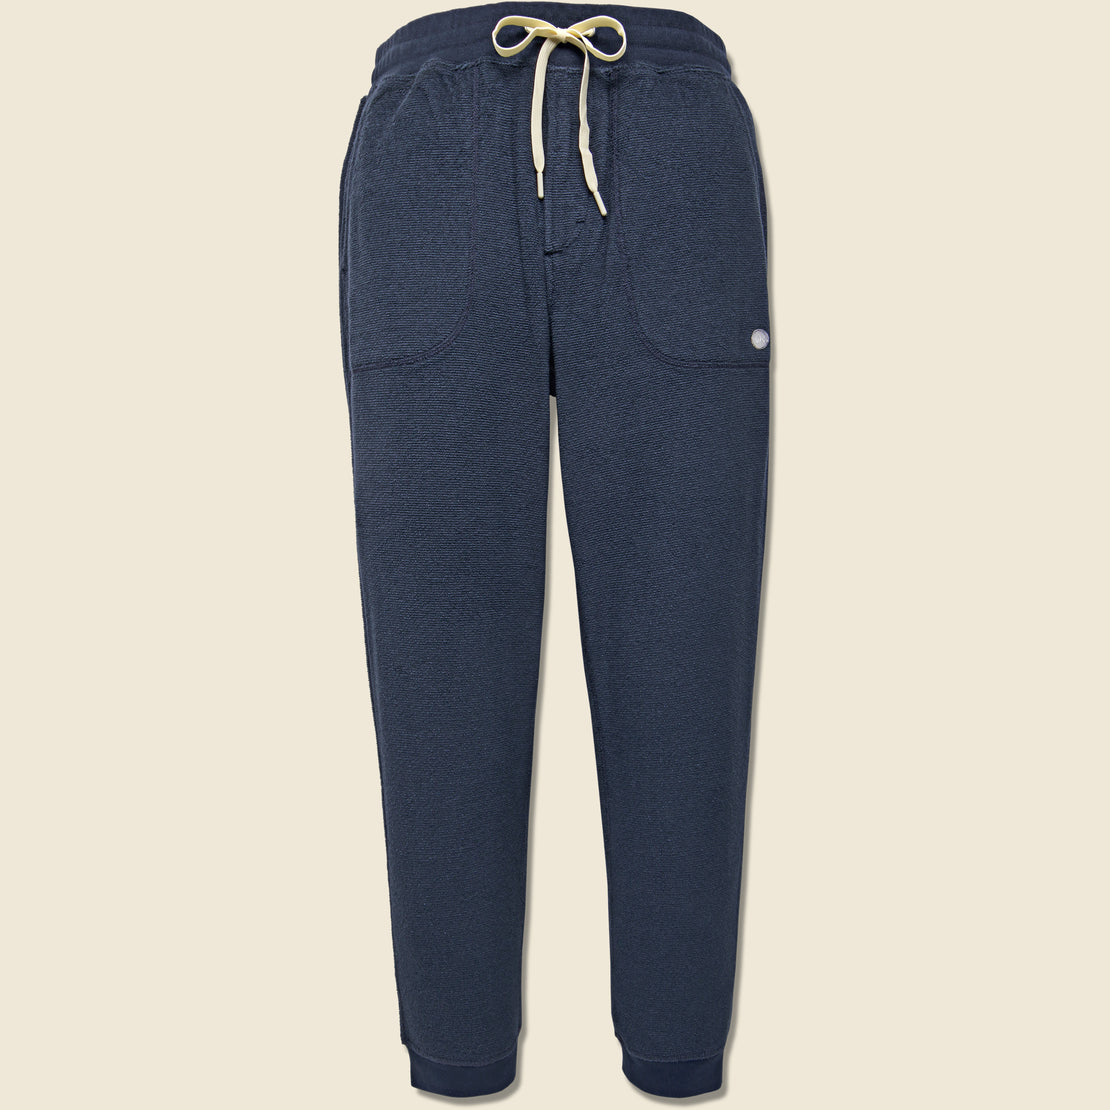 Outerknown Hightide Sweatpant - Night